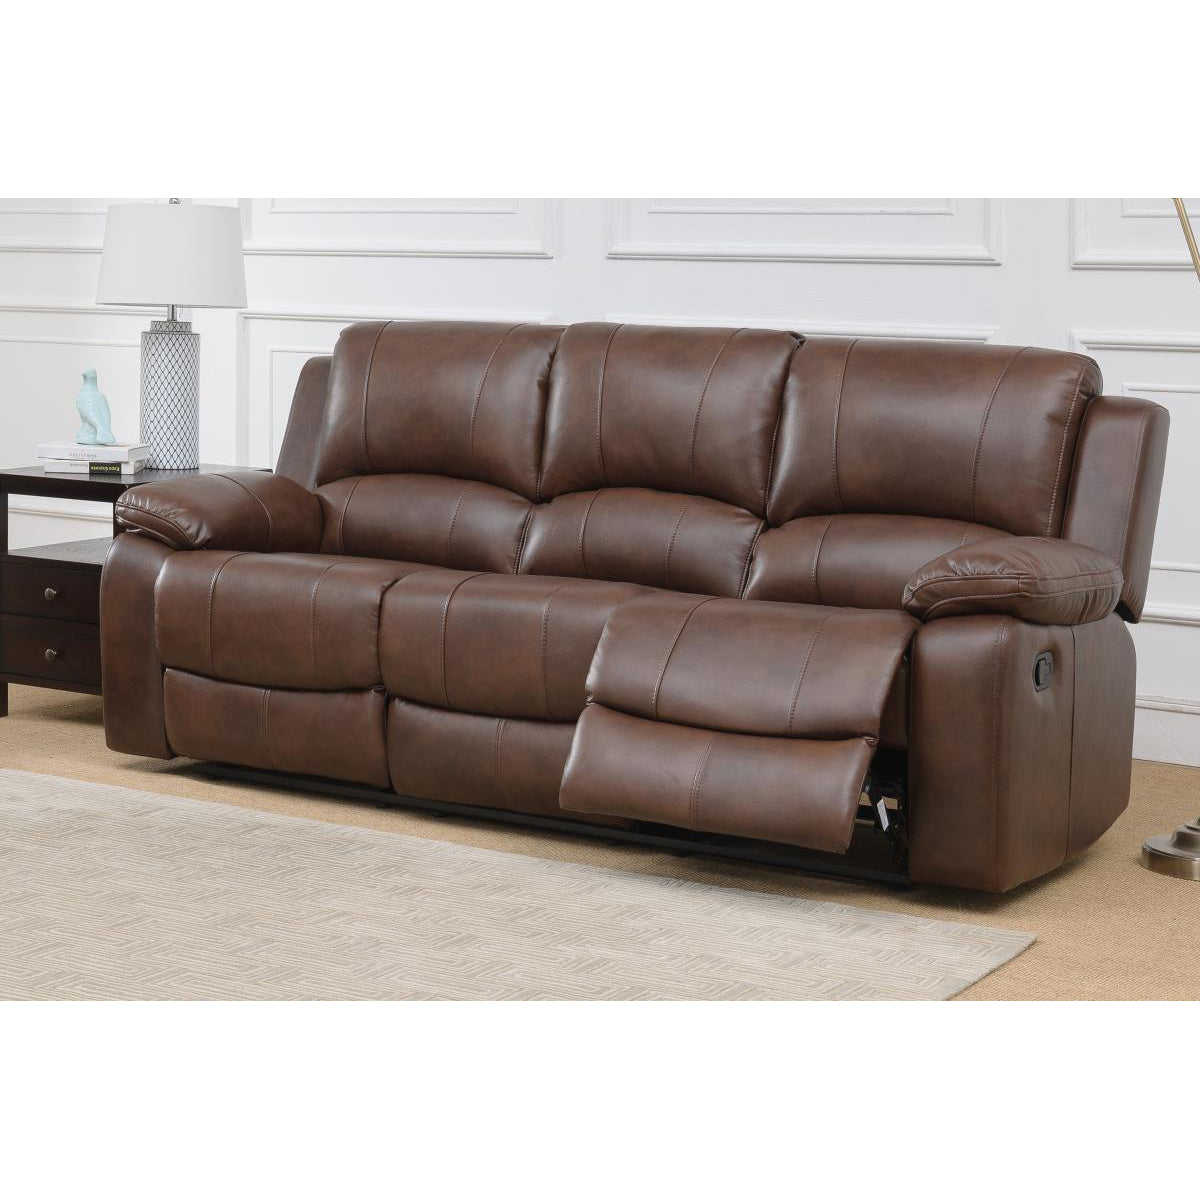 Andalusia Recliner Leathergel And PU 3 Seater Whiskey